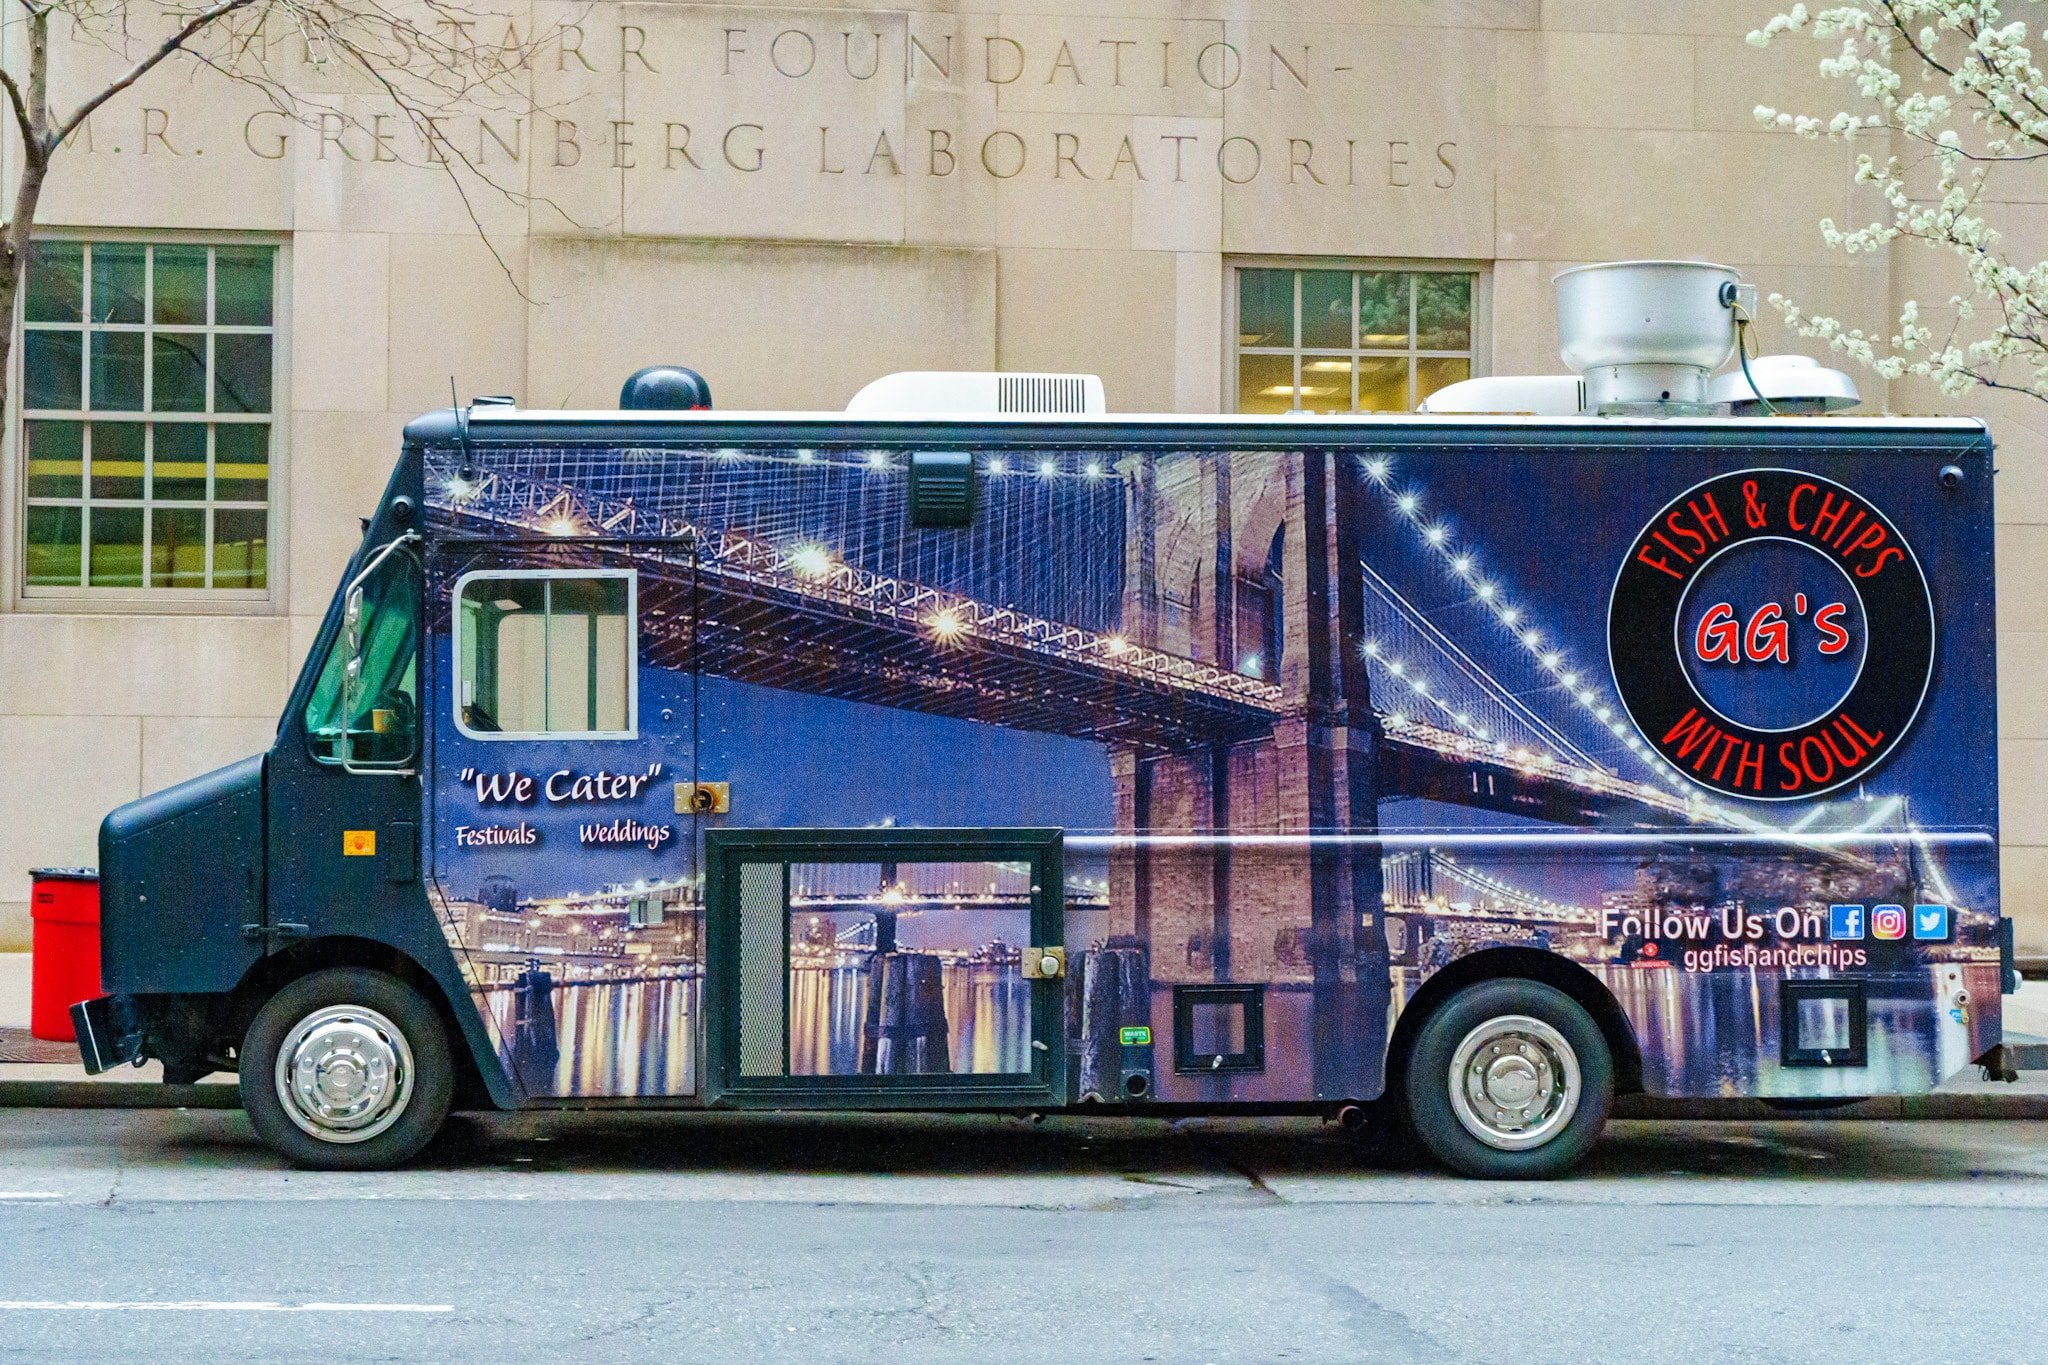 gg's fish and chips food truck parked in front of greenberg laboratories